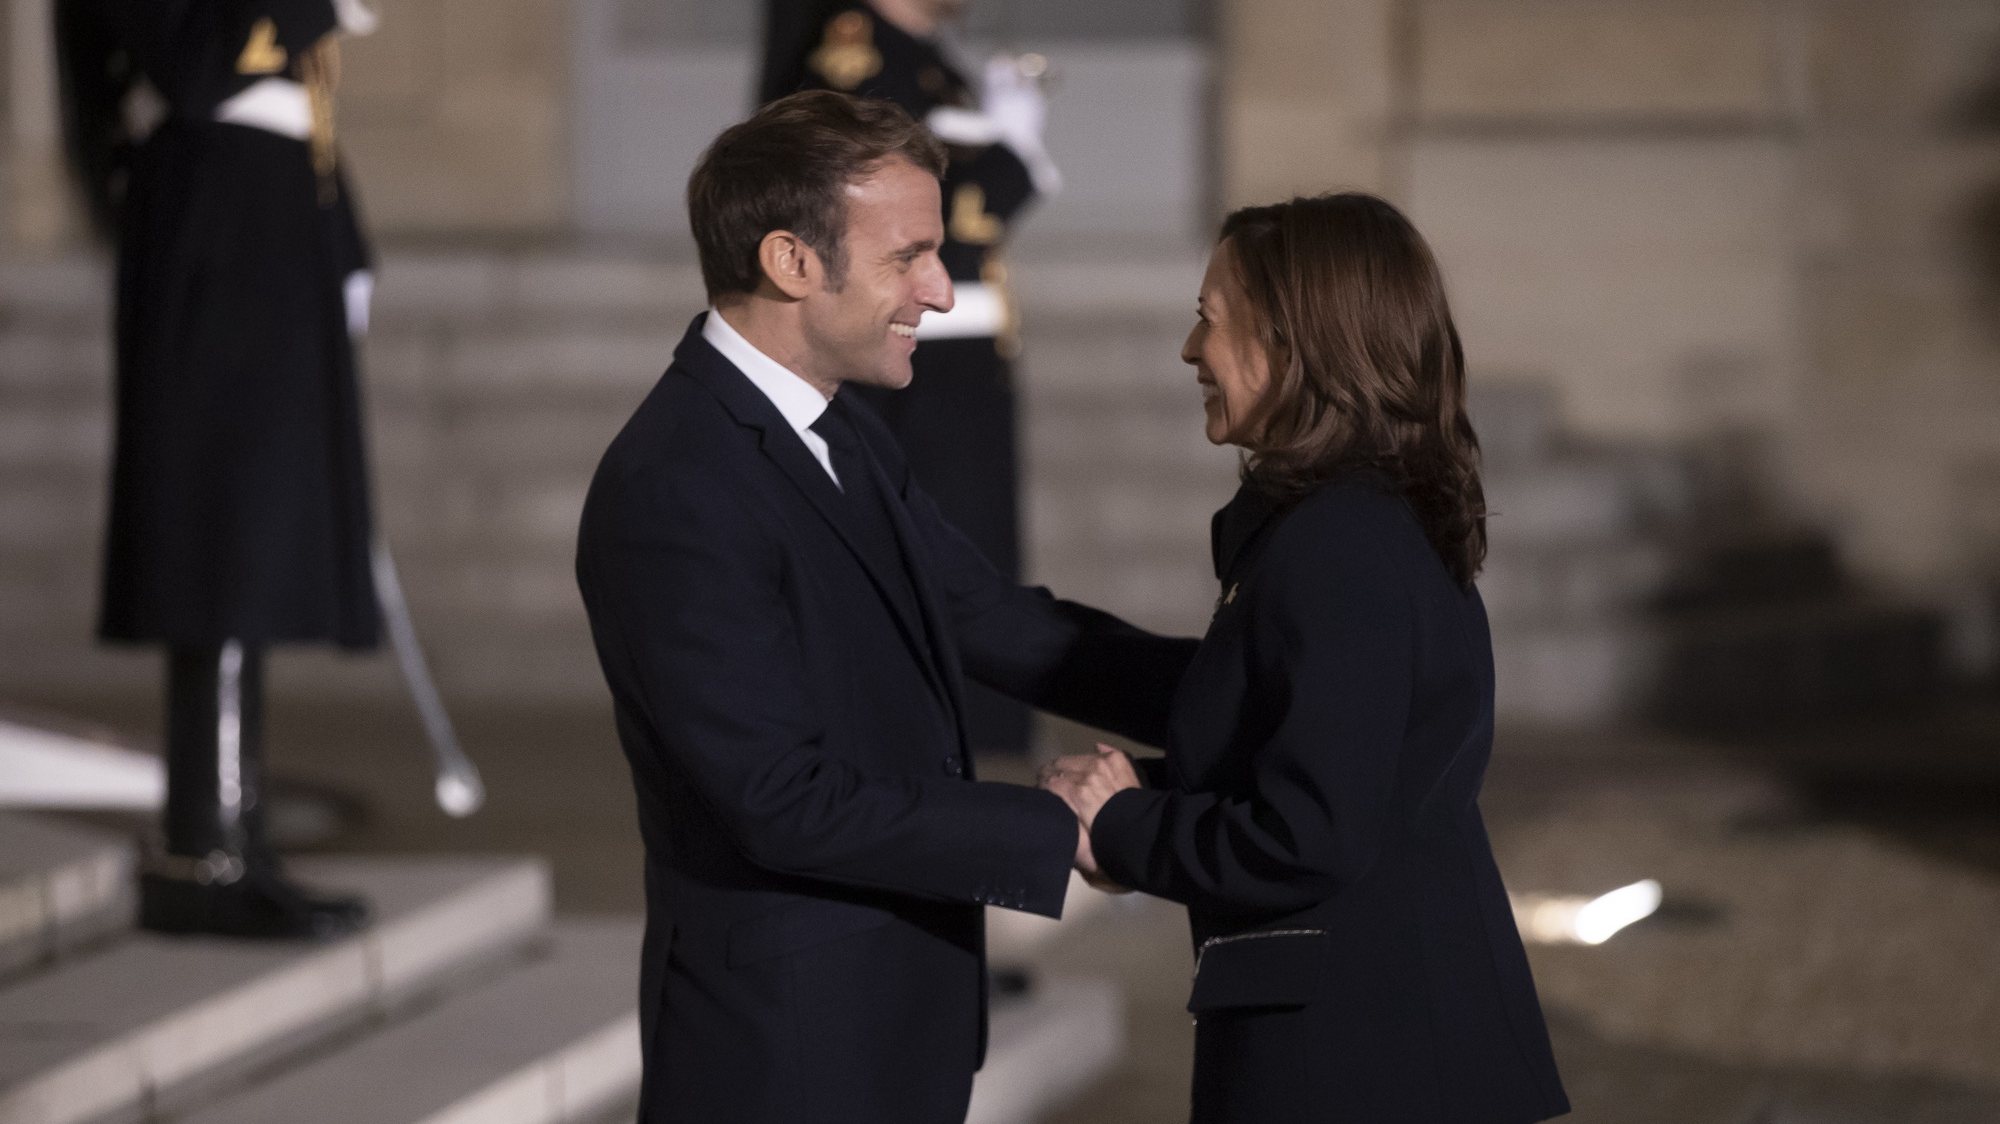 epa09574447 French President Emmanuel Macron (L) greets US Vice President Kamala Harris (R)  as she arrives for a meeting at the Elysee Palace in Paris, France,10 November 2021. Harris is on her first trip to Europe as Vice President.  EPA/IAN LANGSDON